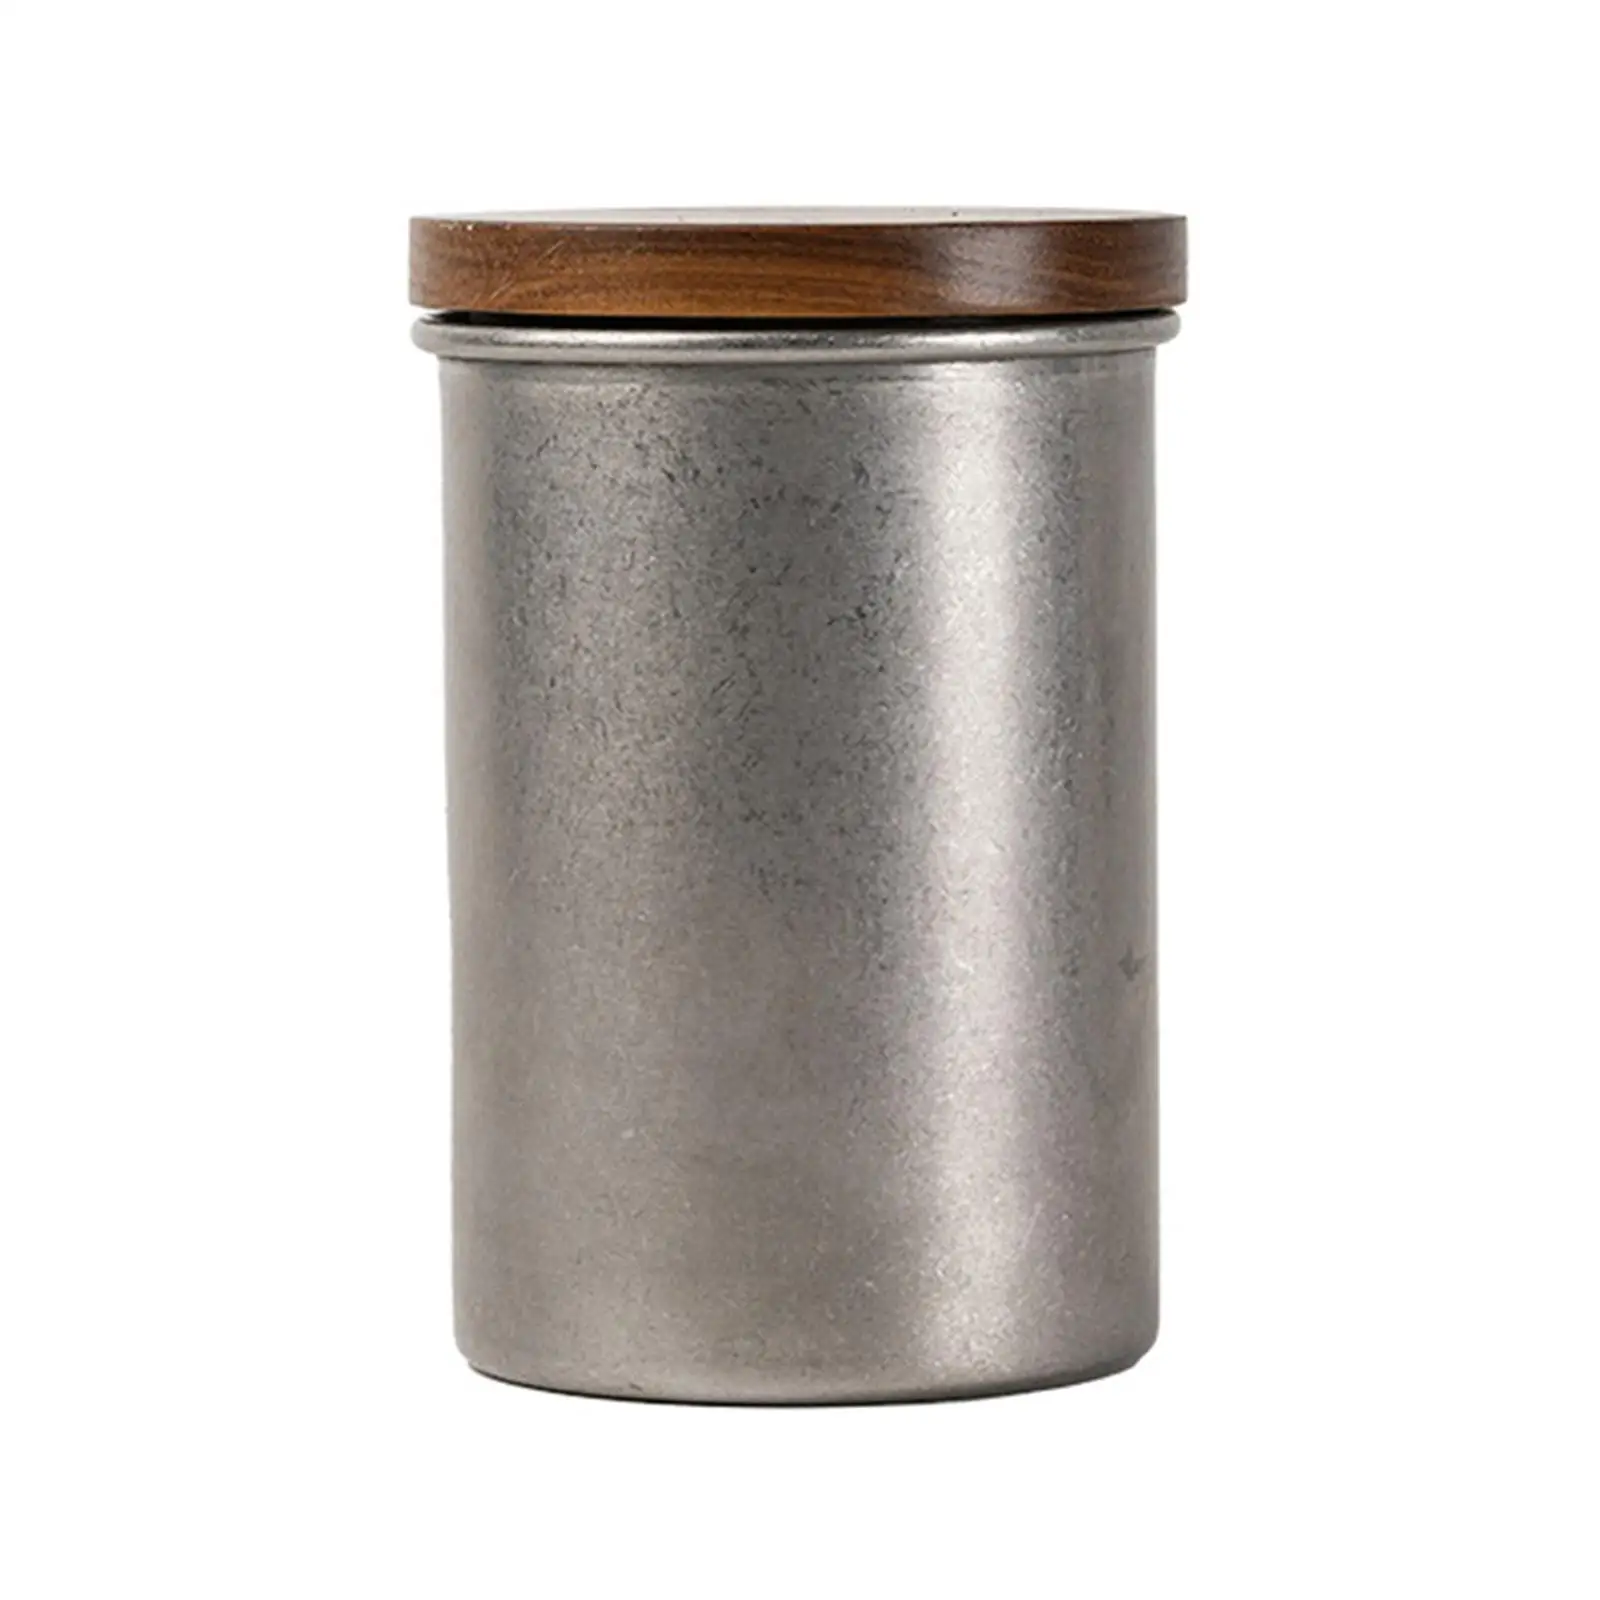 Coffee Canisters Stainless Steel 350ml Capacity Airtight Lid Multiuse Sealed Coffee Containers for Sugar Camping